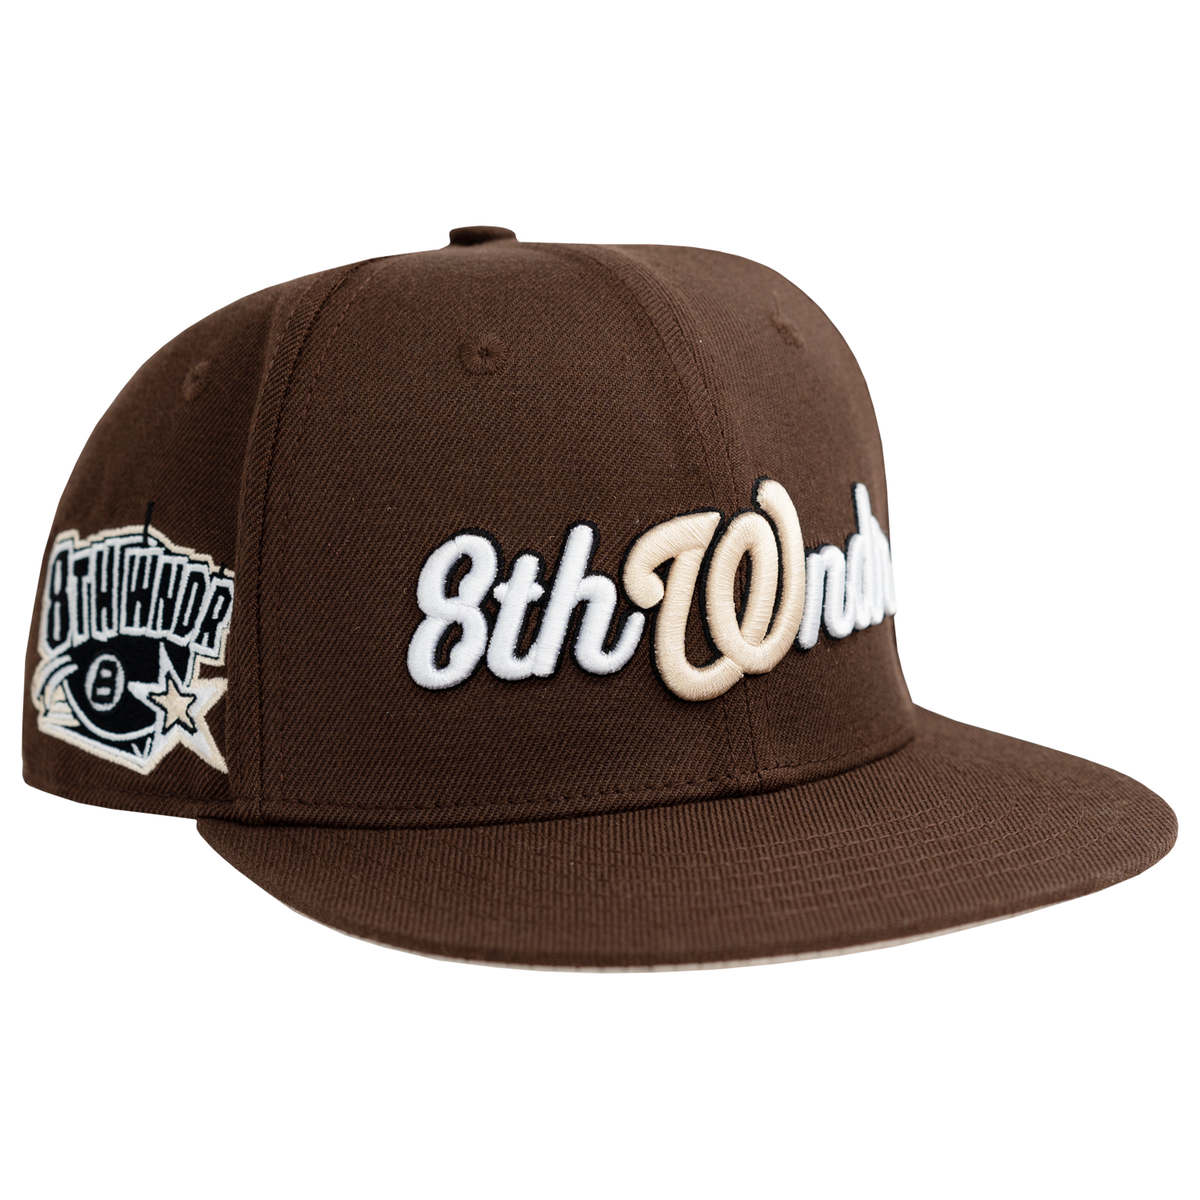 FITTED HAT BROWN / CREAM